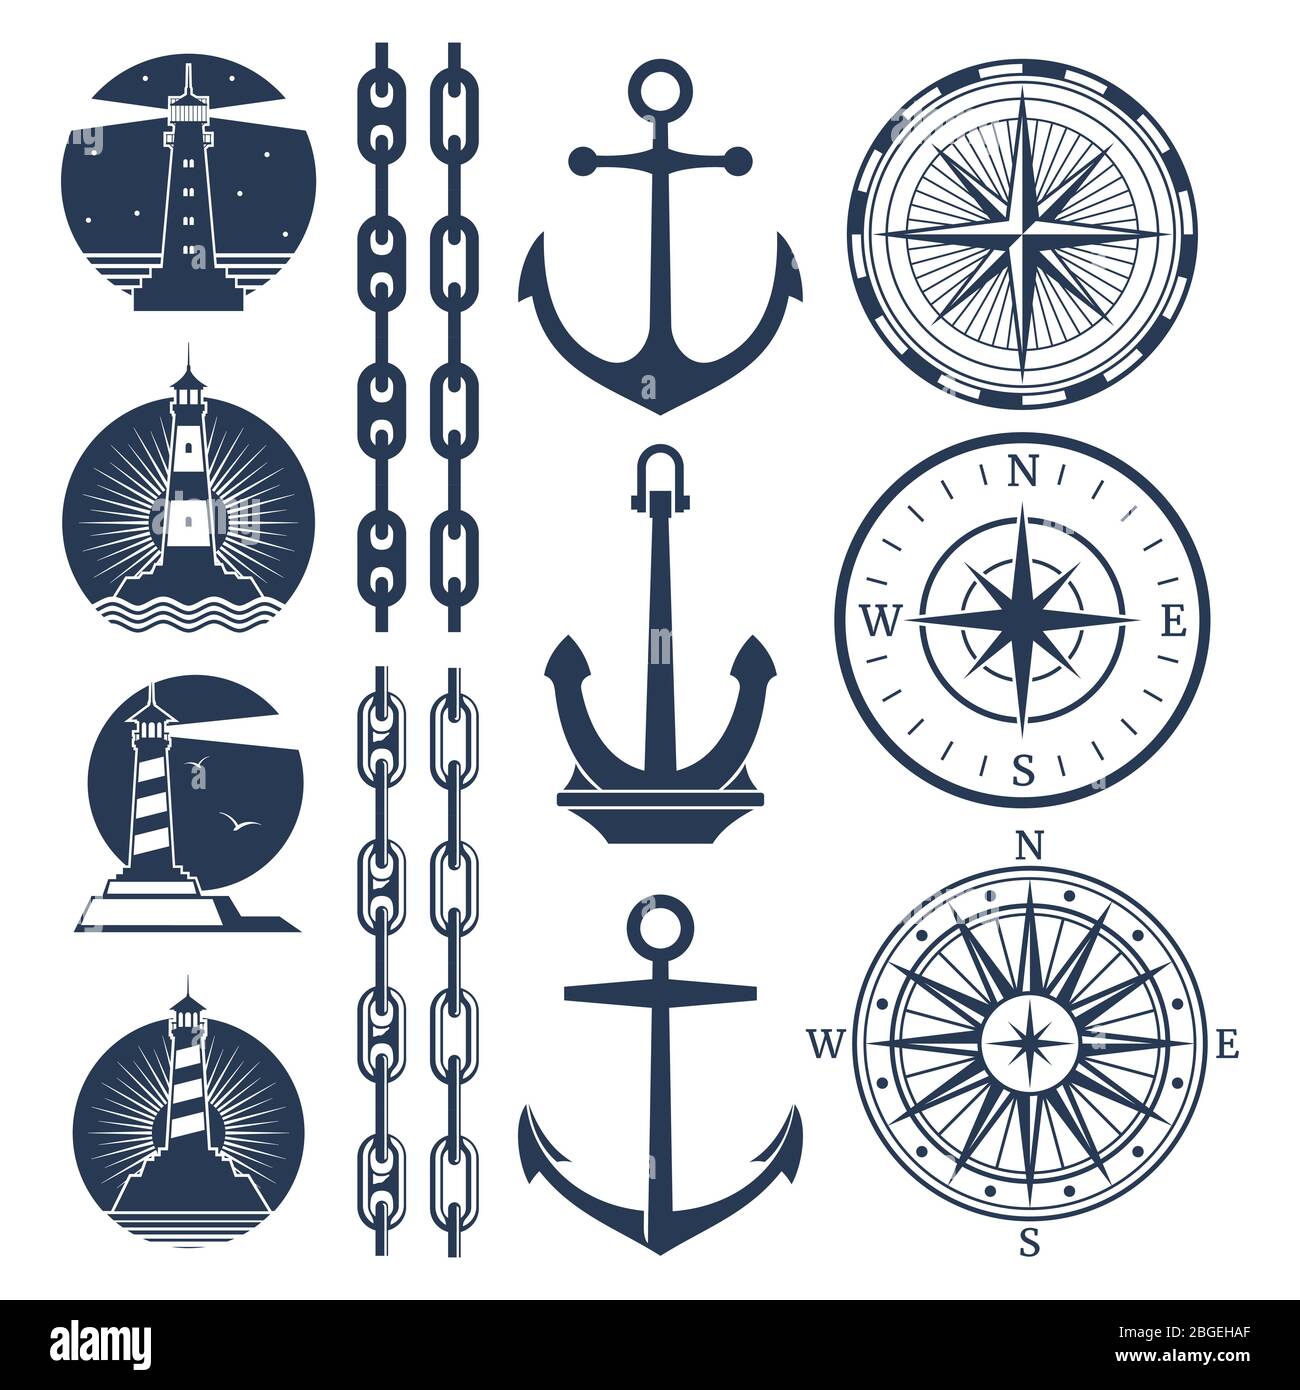 Nautical logos and elements set - compass lighthouses anchor chains. Vector illustration Stock Vector